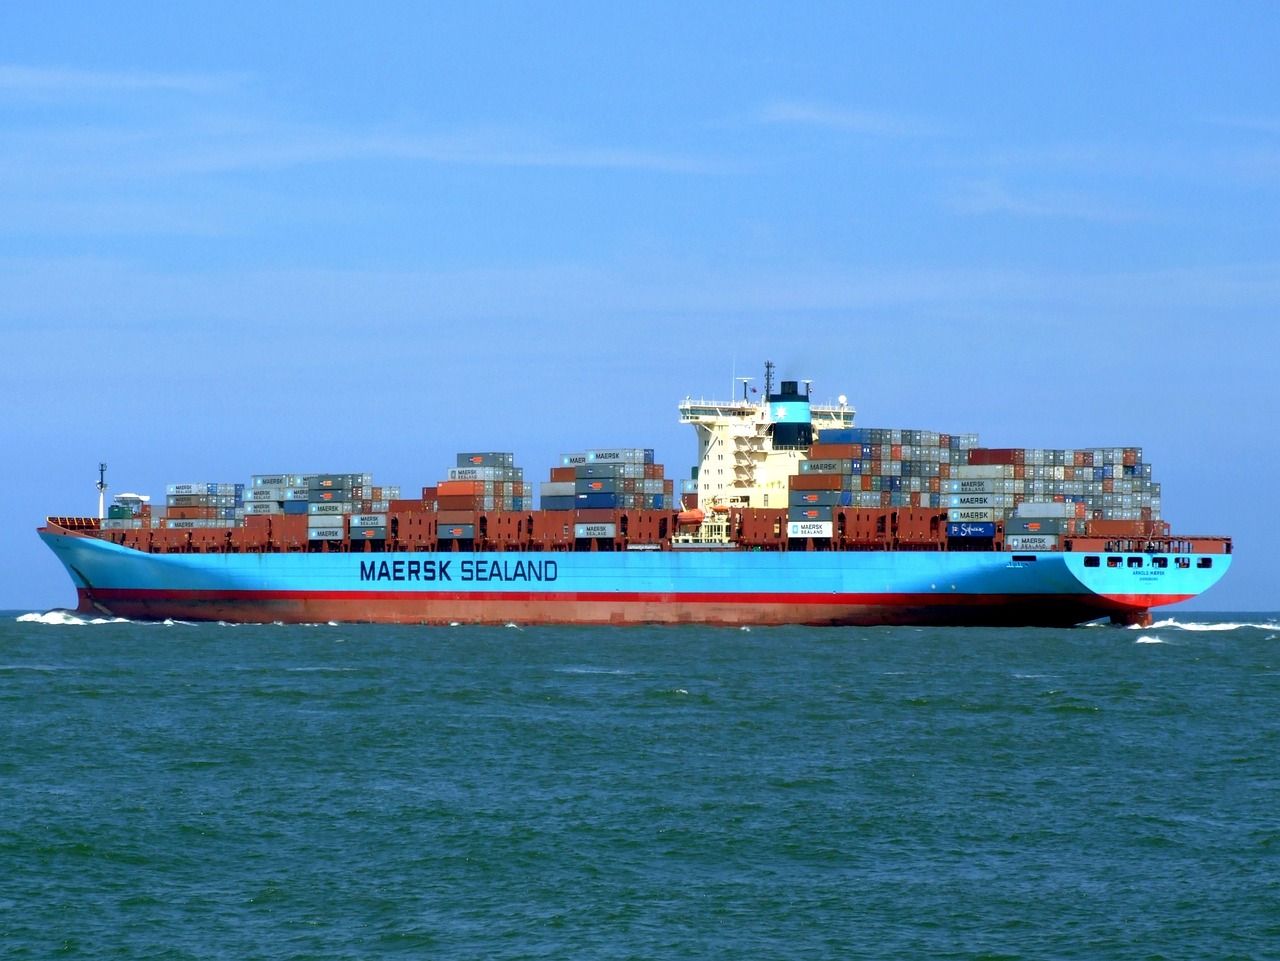 Maersk cuts 10,000 jobs – more cases of COVID-19 reported